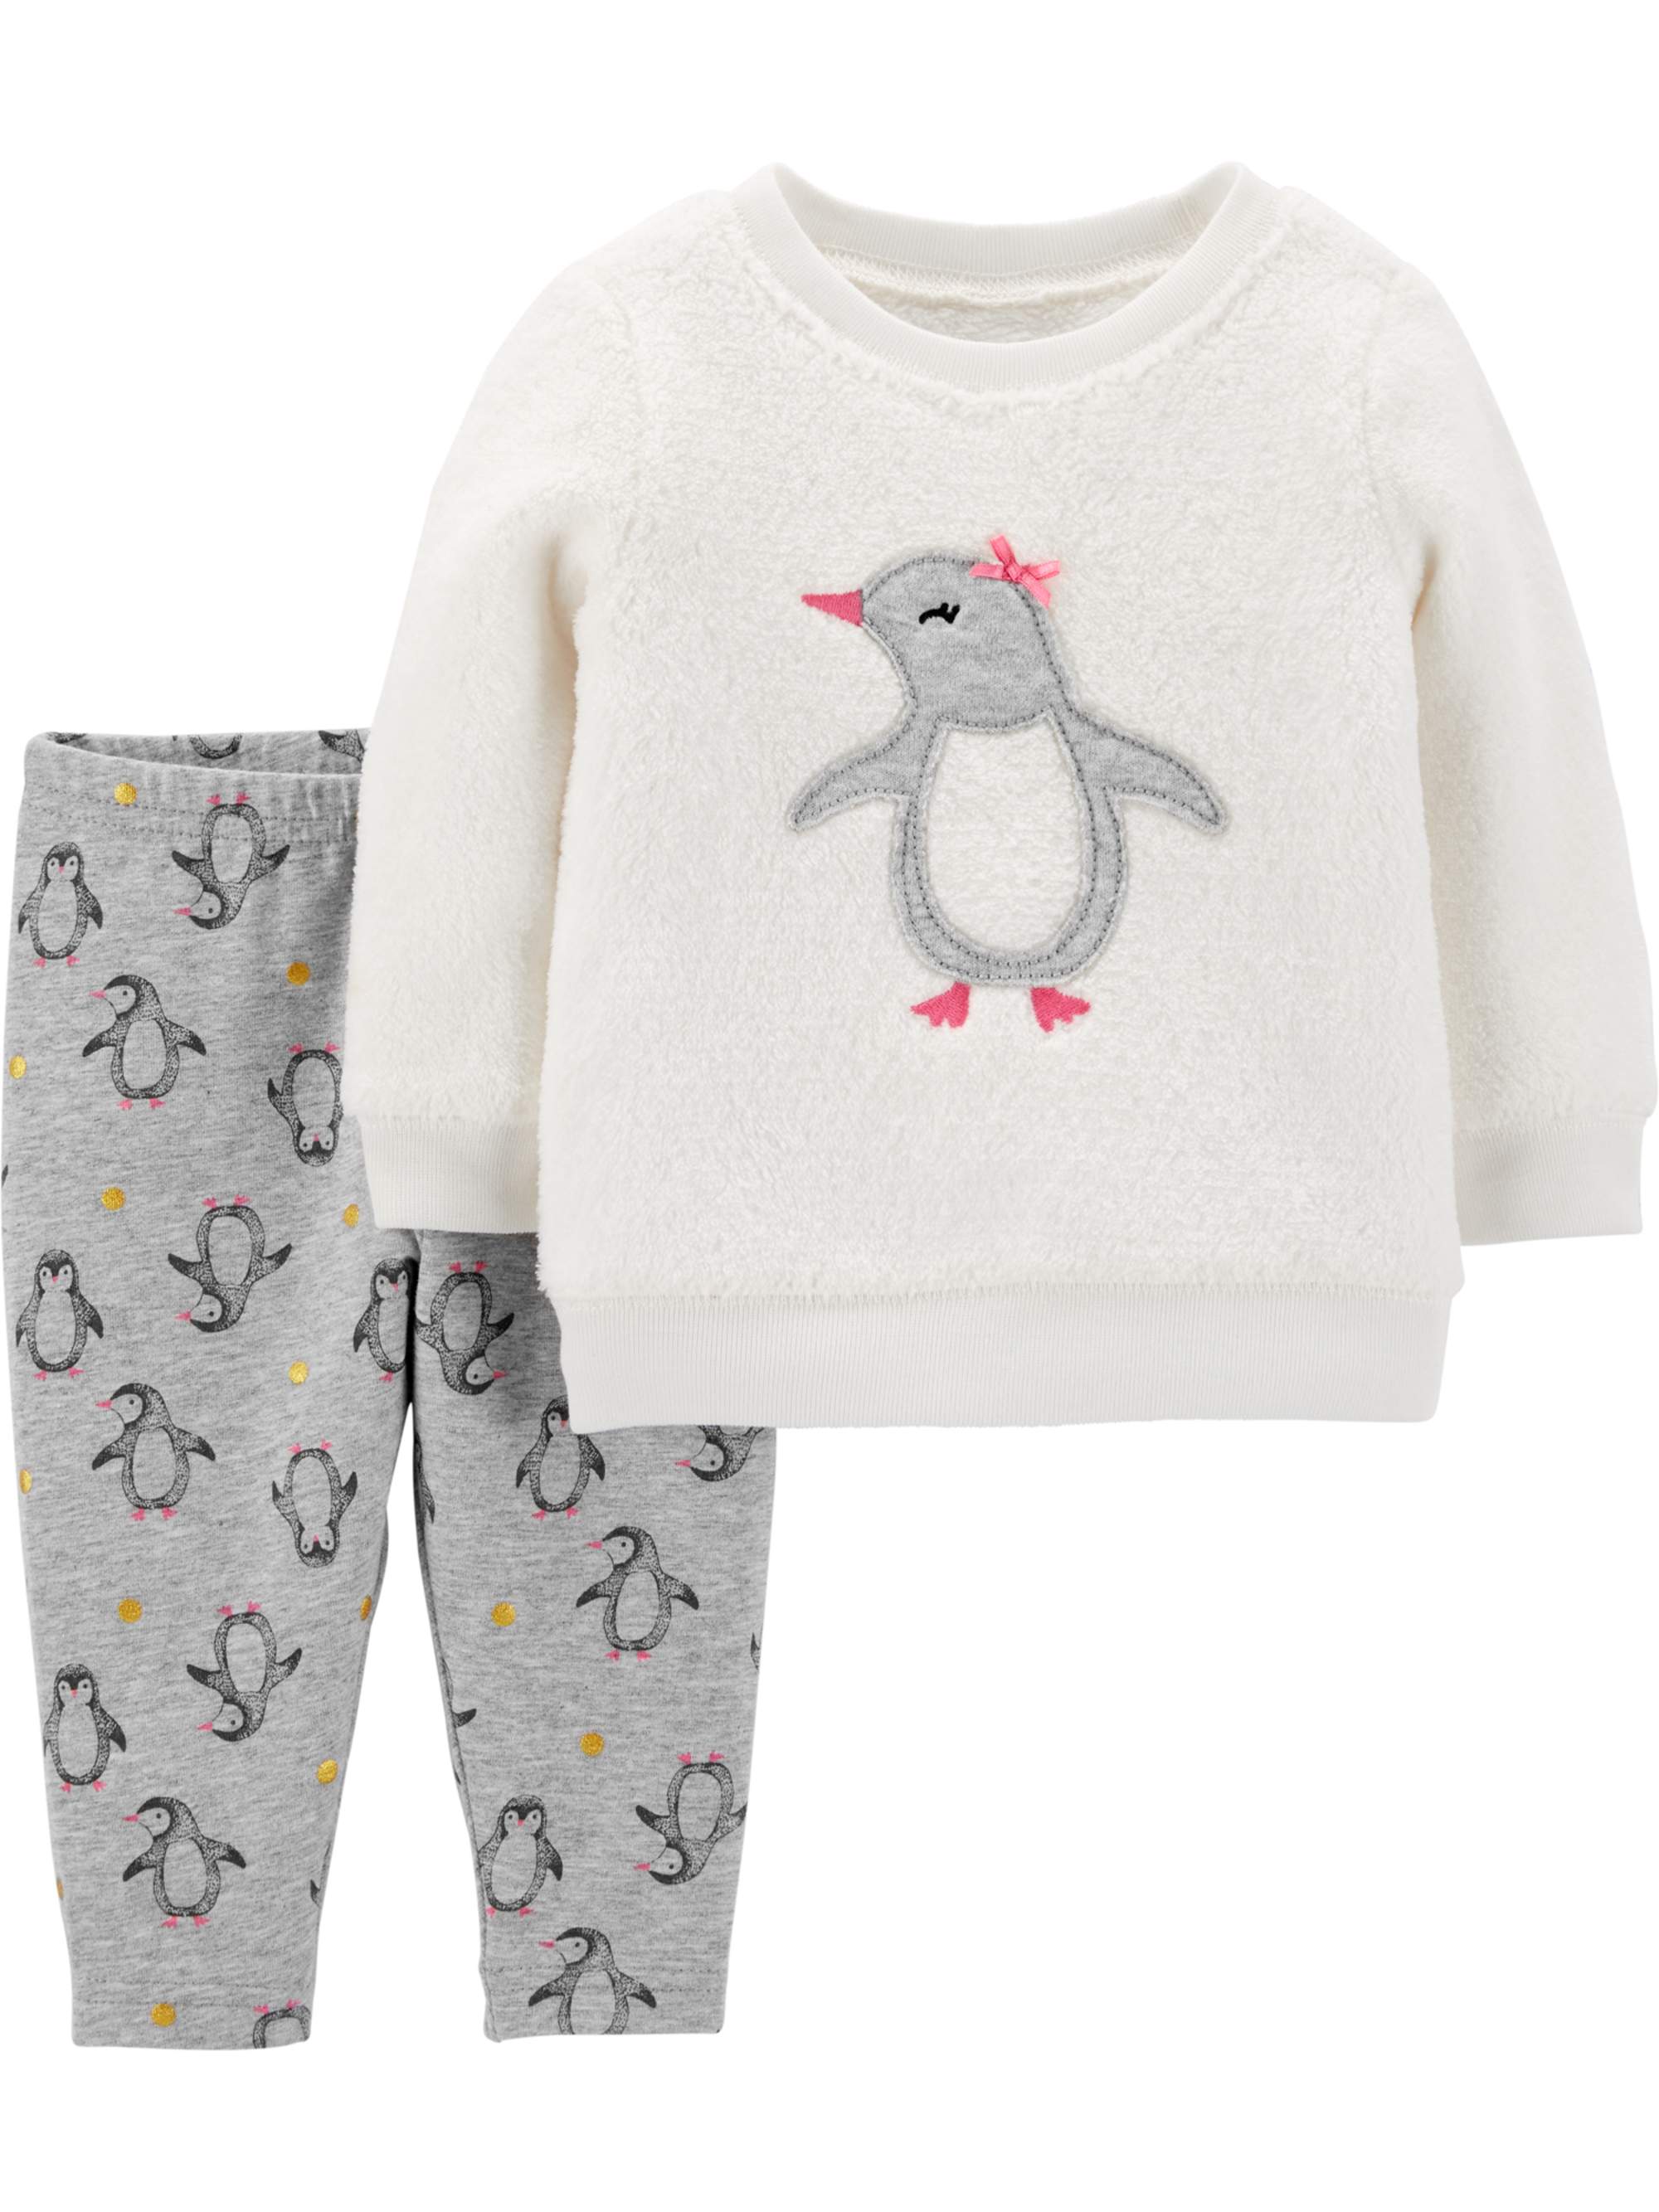 Carter's Child of Mine Toddler Girl Fleece Long Sleeve Critter Top & Pants, 2pc Outfit Set - image 1 of 1